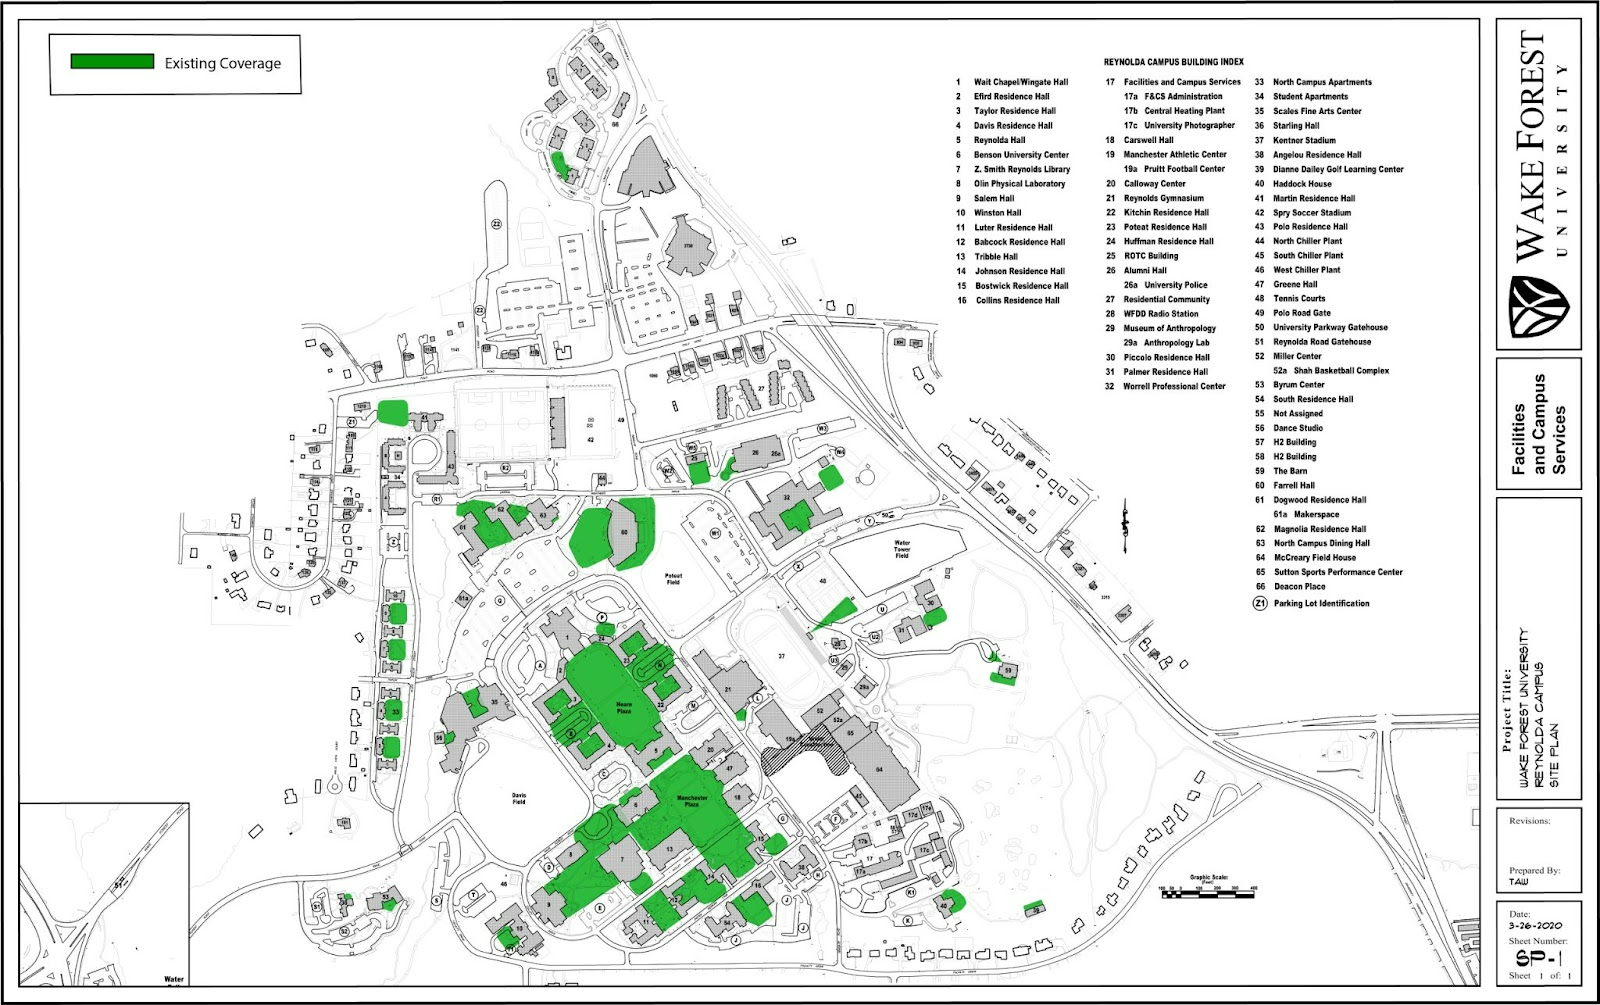 An image of the Reynolda campus with wireless areas highlighted in green